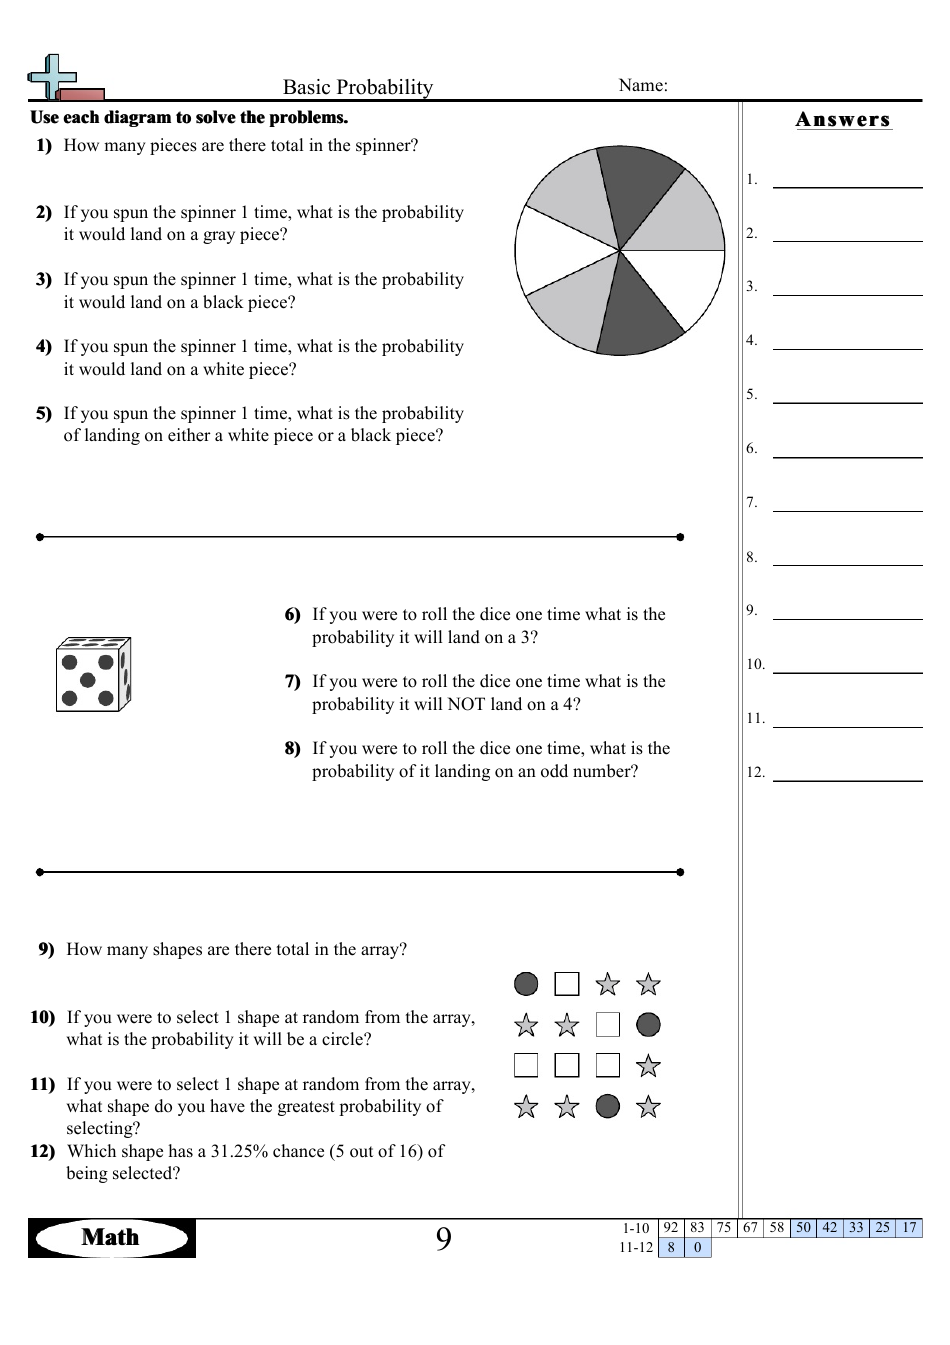 Basic Probability Worksheet With Answer Key Download Printable Pdf Pertaining To Probability Worksheet With Answers